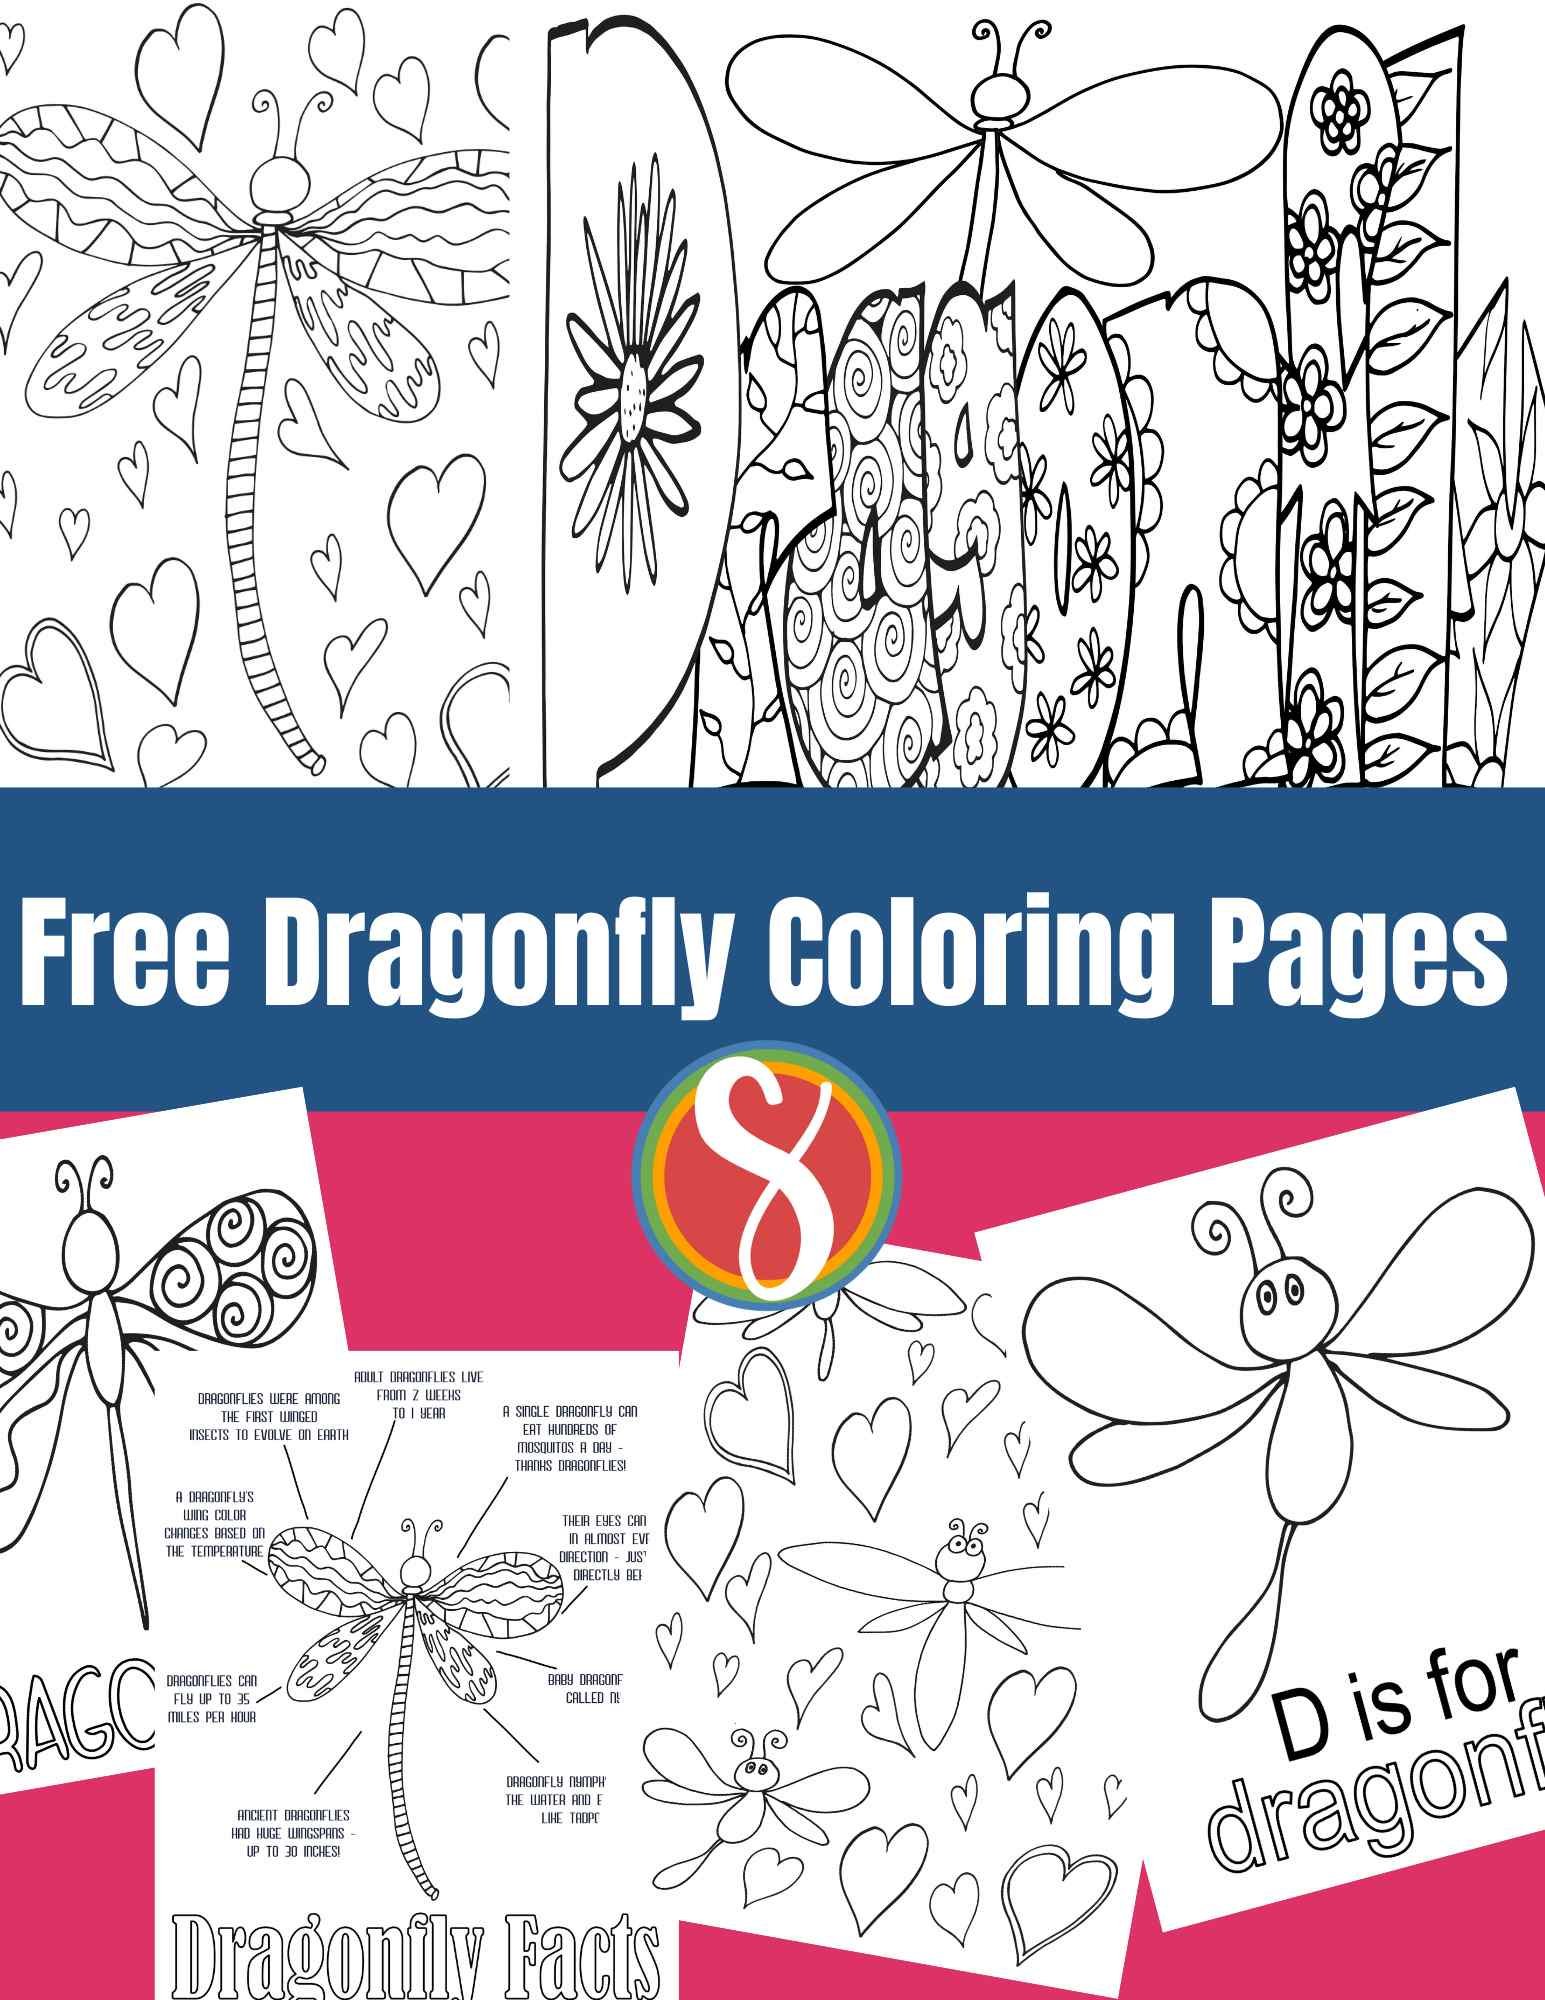 collage of dragonfly coloring pages on a pink background